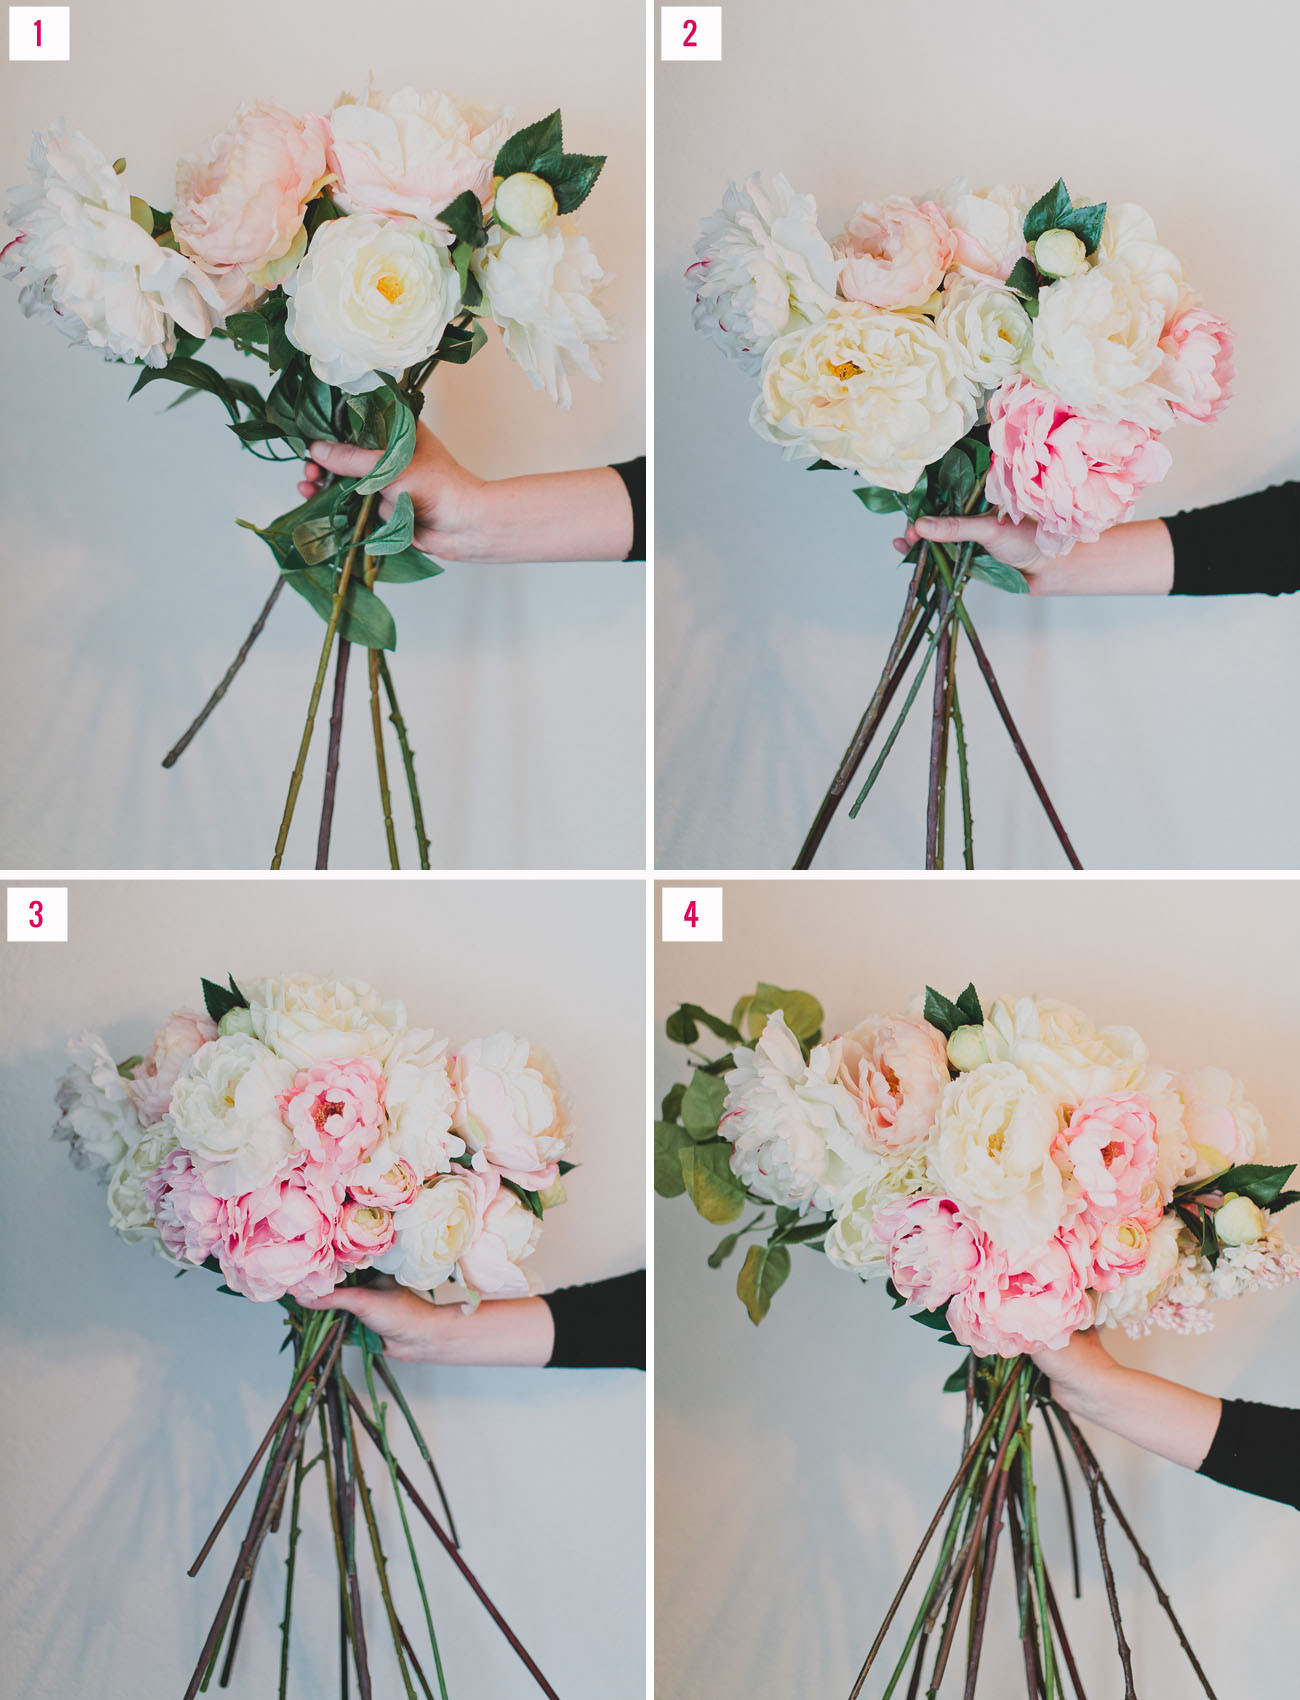 How To DIY Wedding Flowers
 DIY Silk Flower Bouquet with Afloral